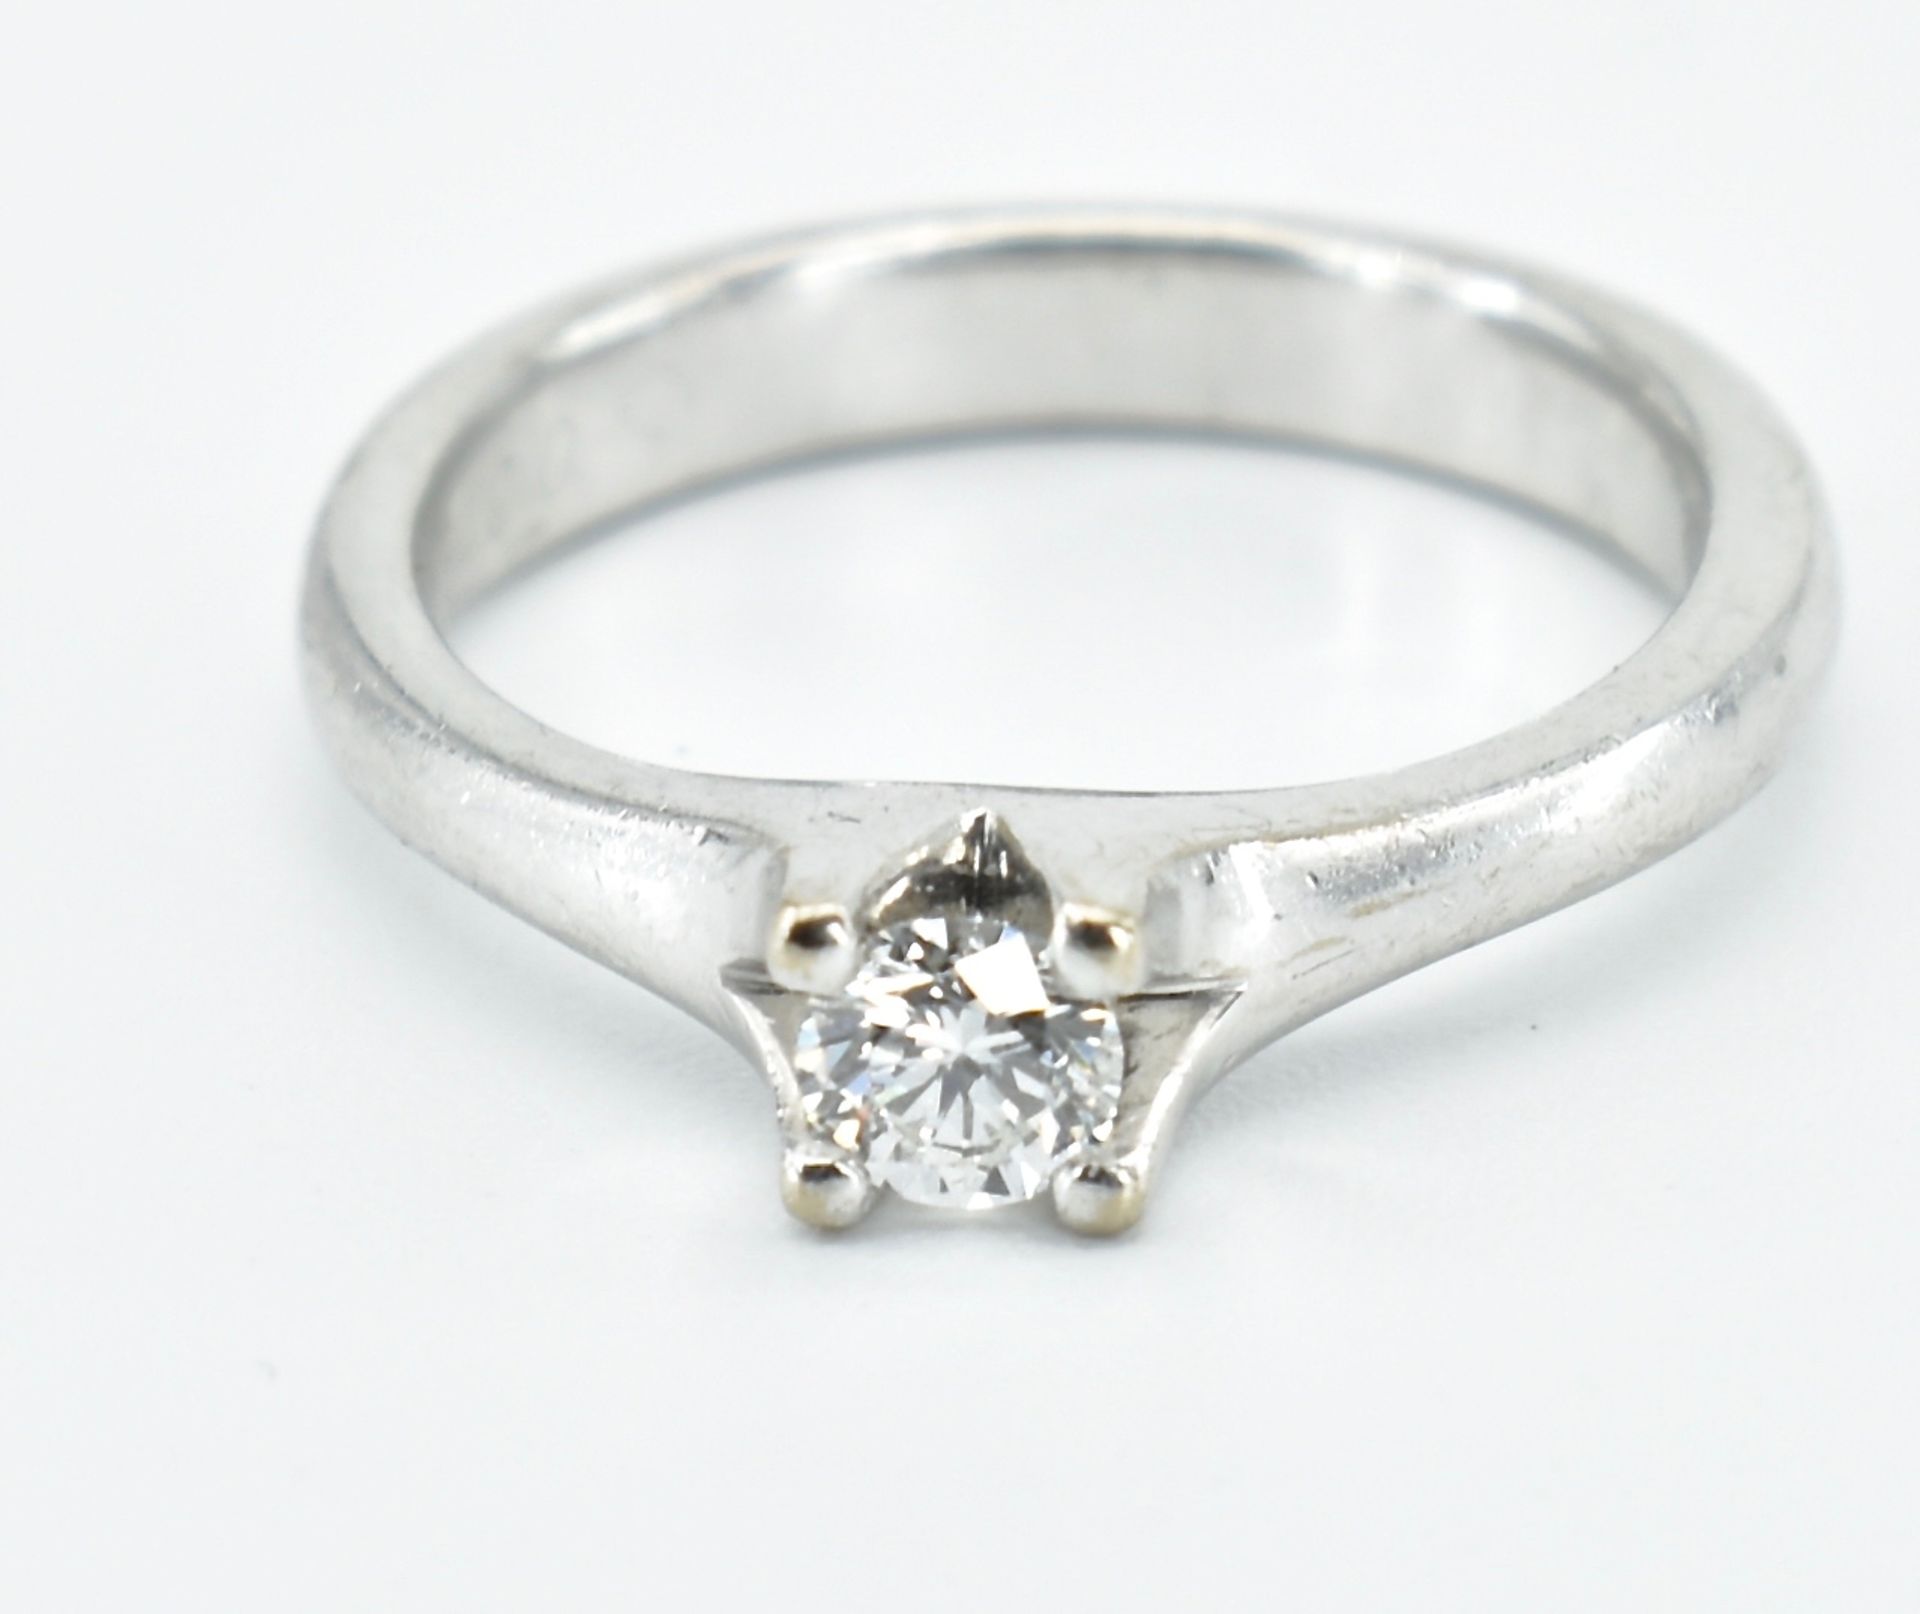 18ct White Gold & Diamond Solitaire Ring - Image 3 of 3